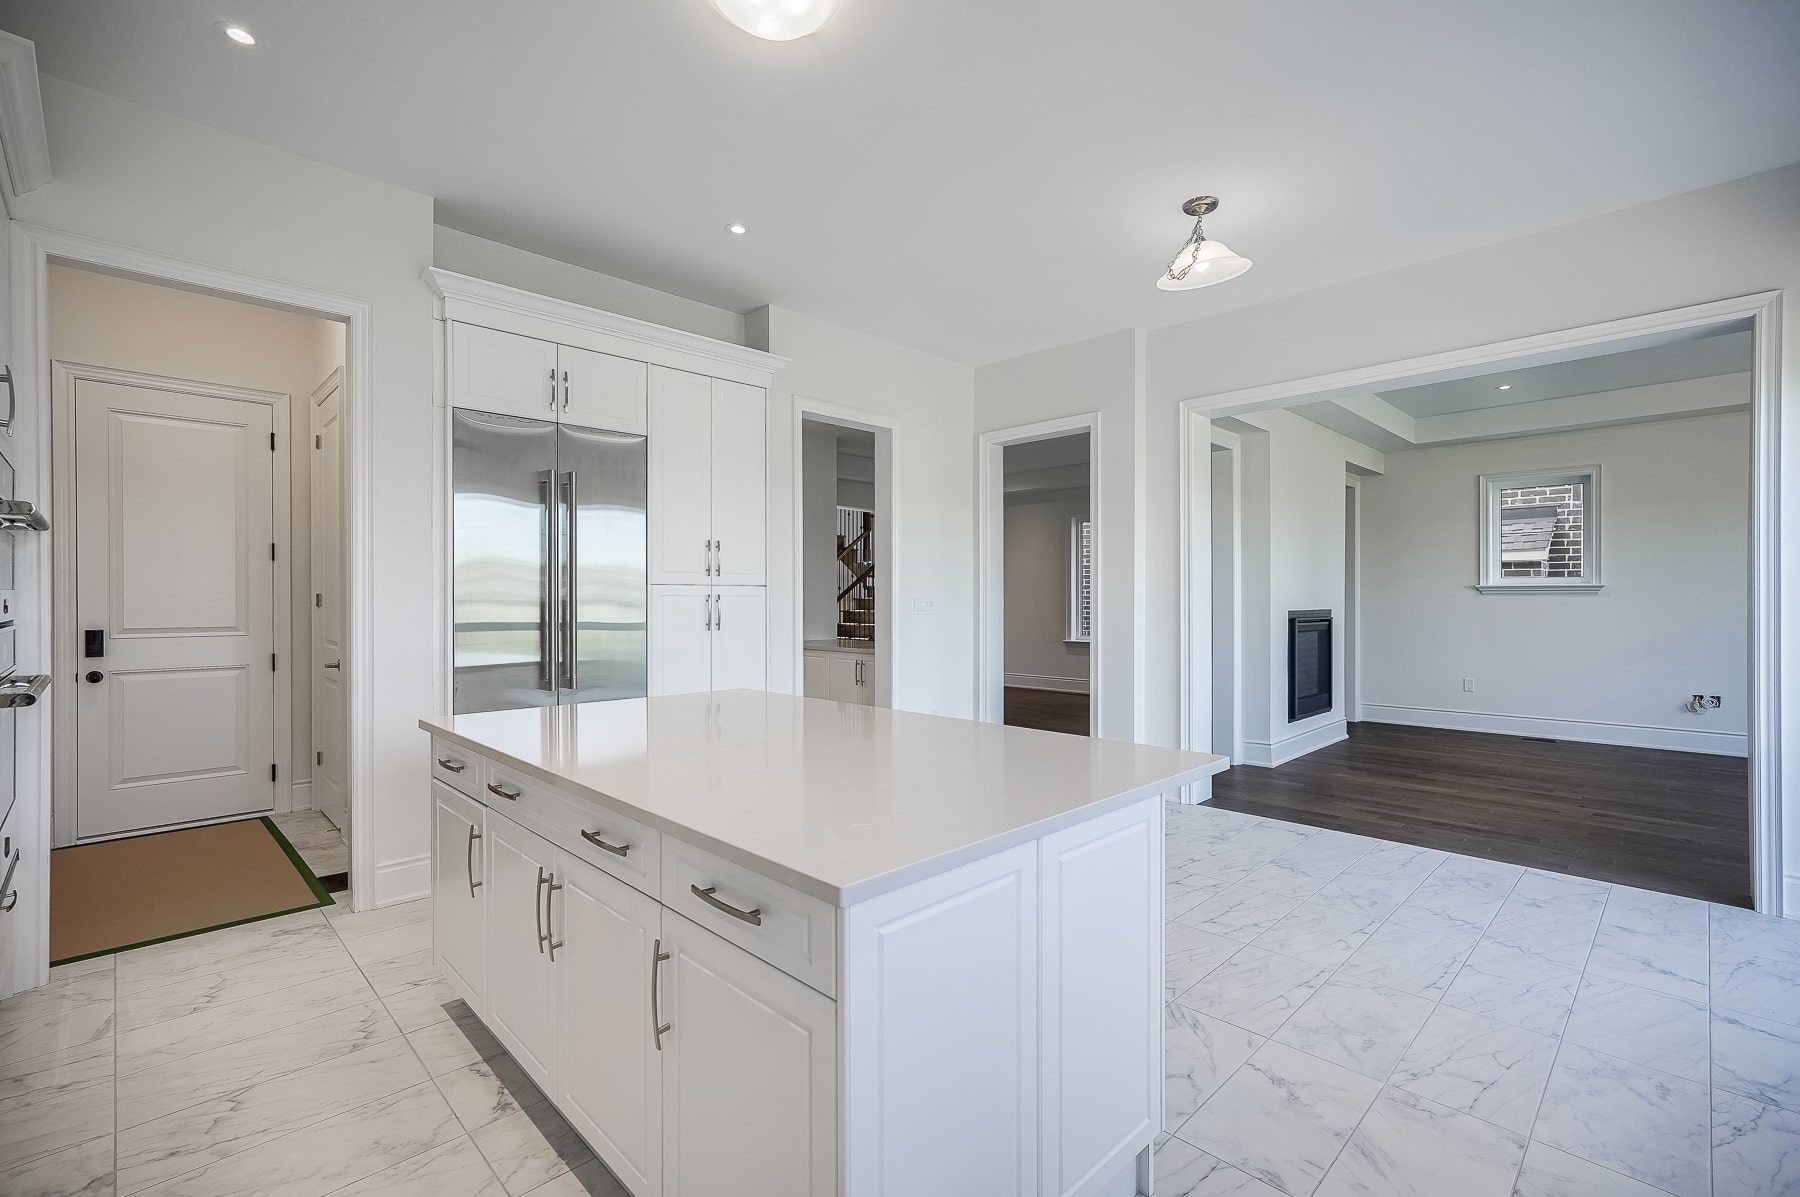 https://www.spectrumrealtyservices.com/images/Bronte-Green-at-Glen-Abbey-unit-2385-7.jpg